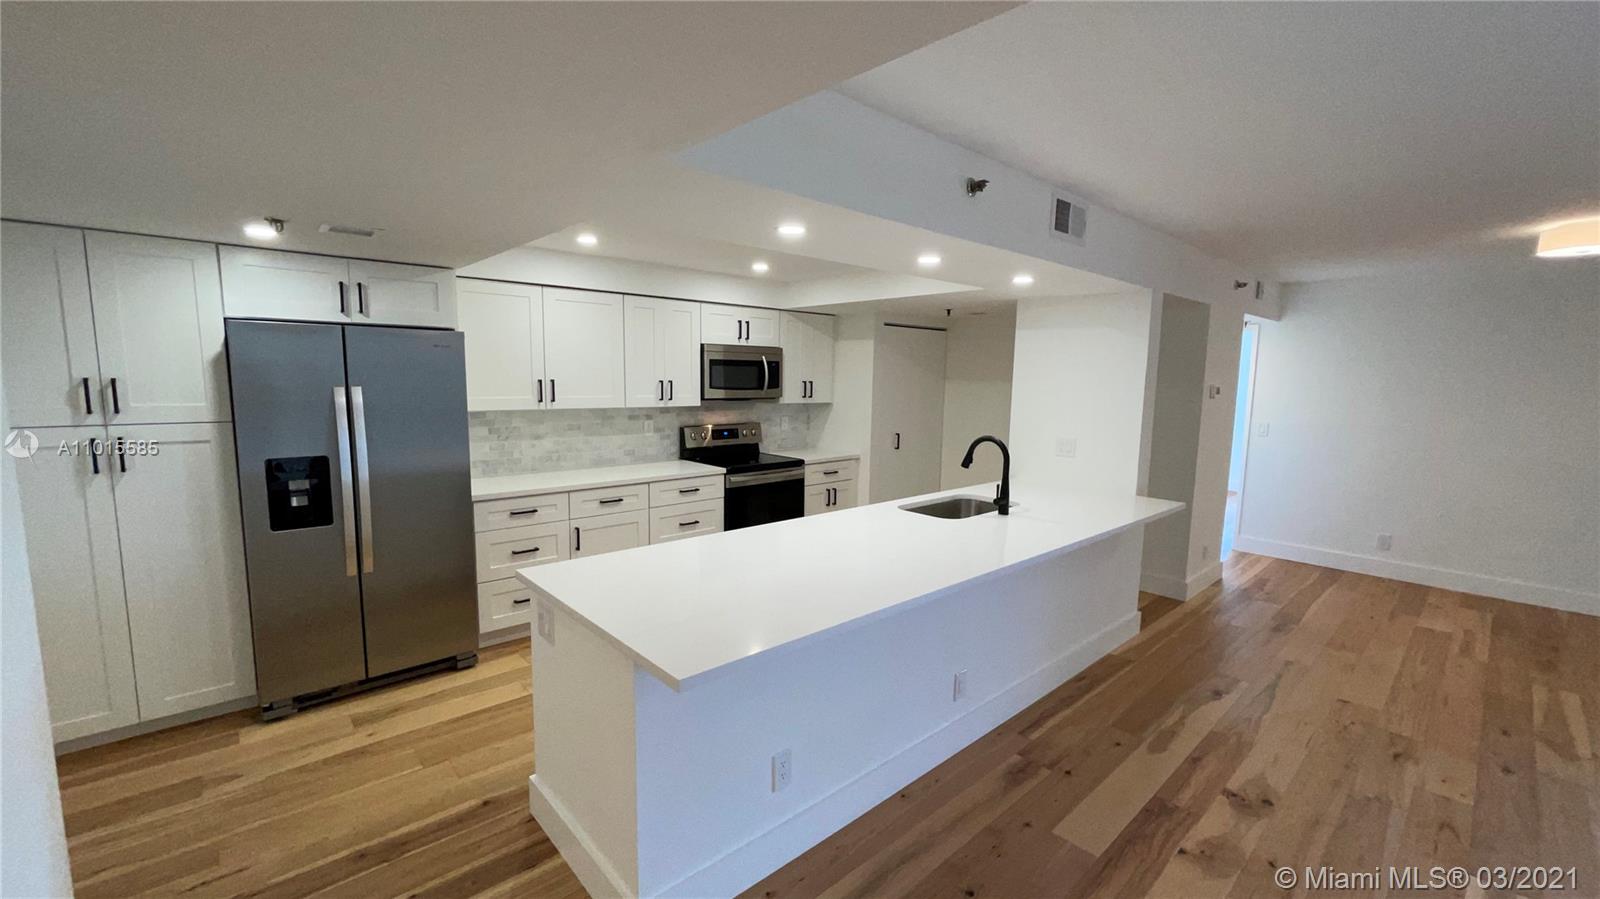 a large kitchen with stainless steel appliances a refrigerator and a stove top oven